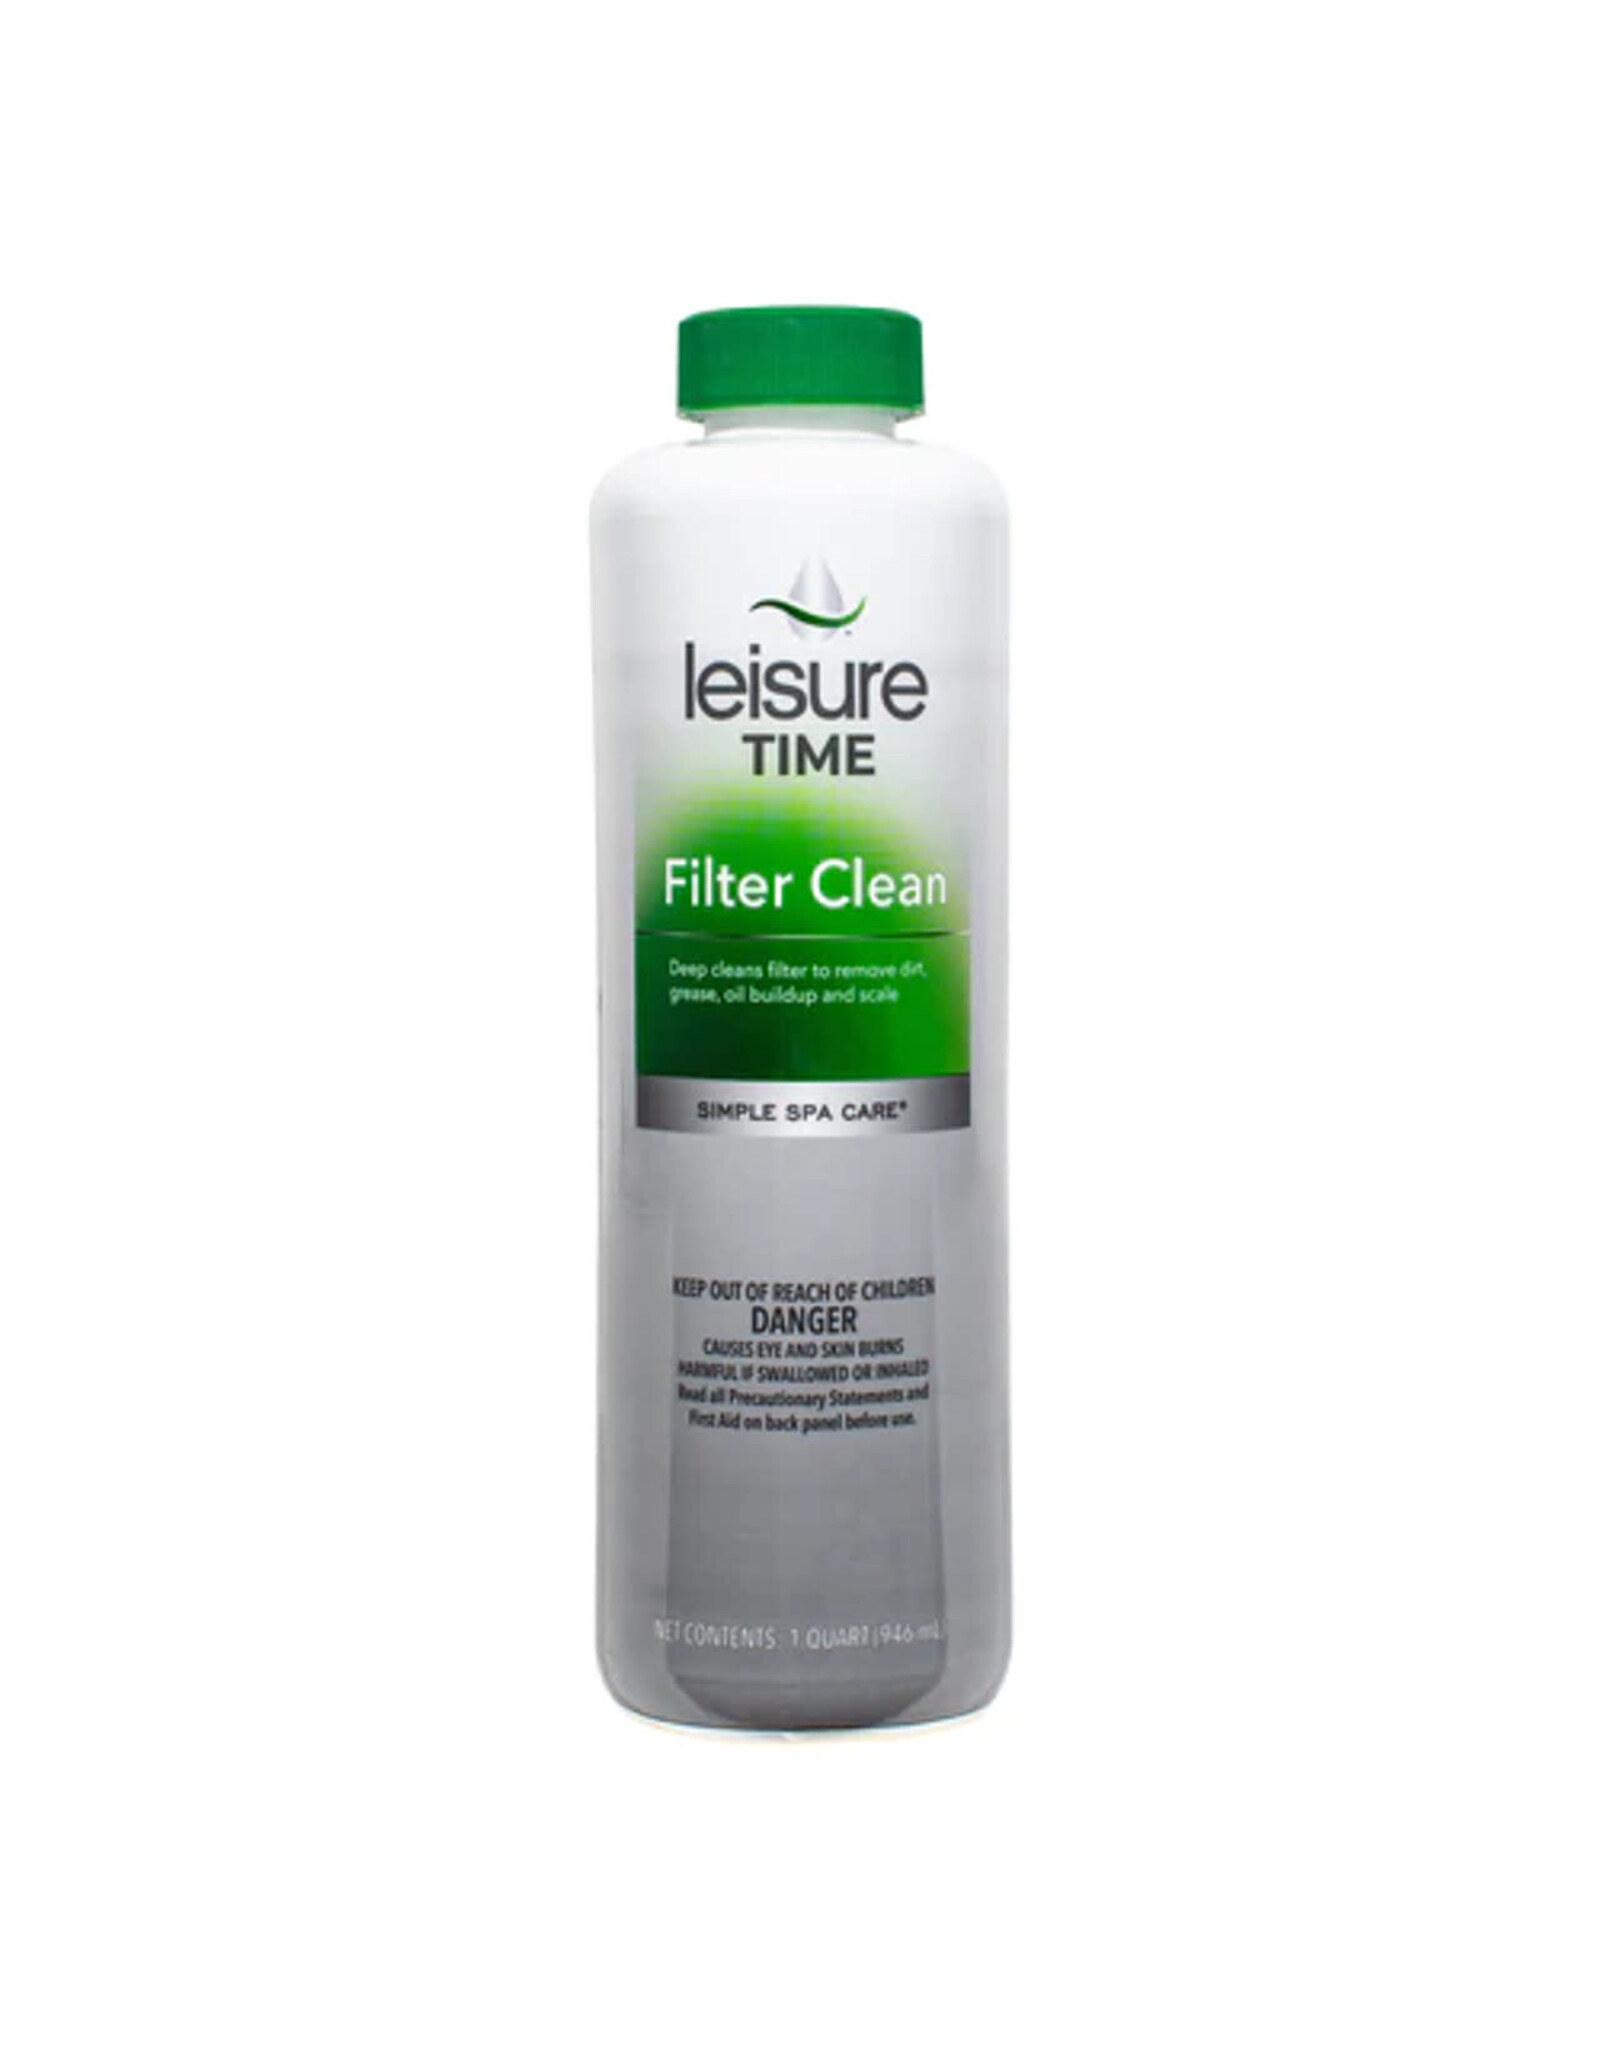 Leisure Time Leisure time-Filter Clean 16fl oz